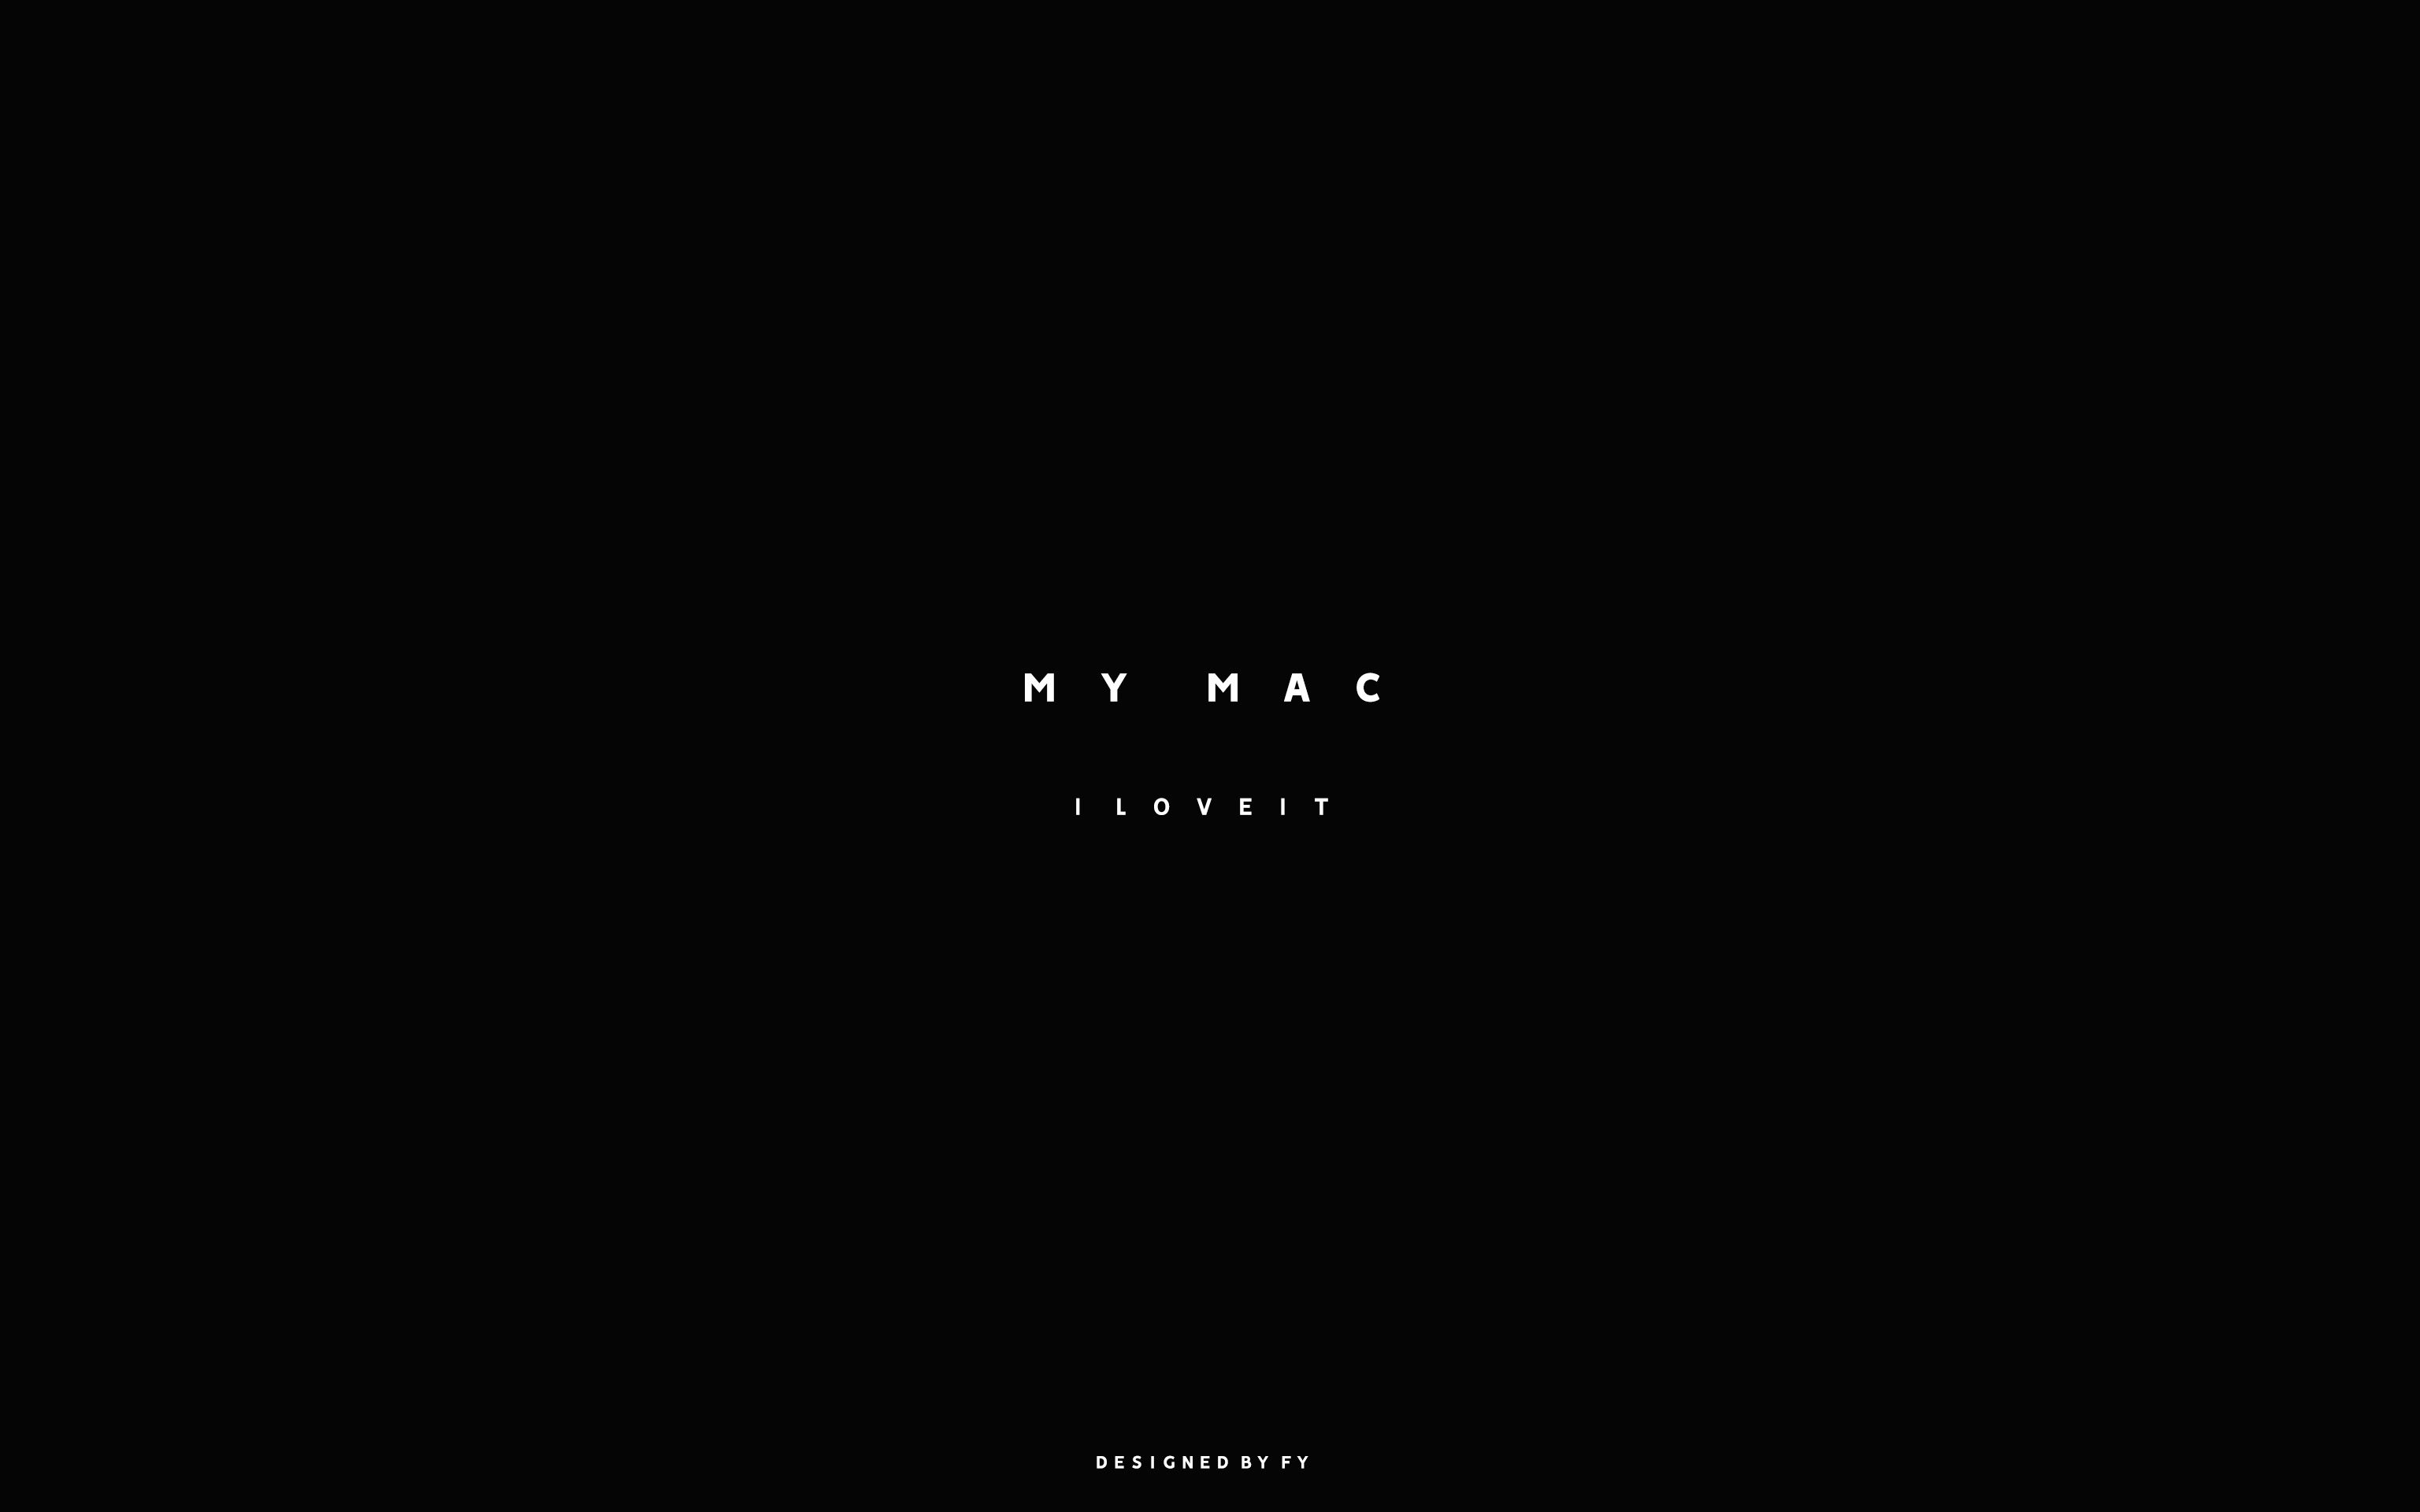 Typography Mac Wallpaper My Mac Black And White Color Design By Yf